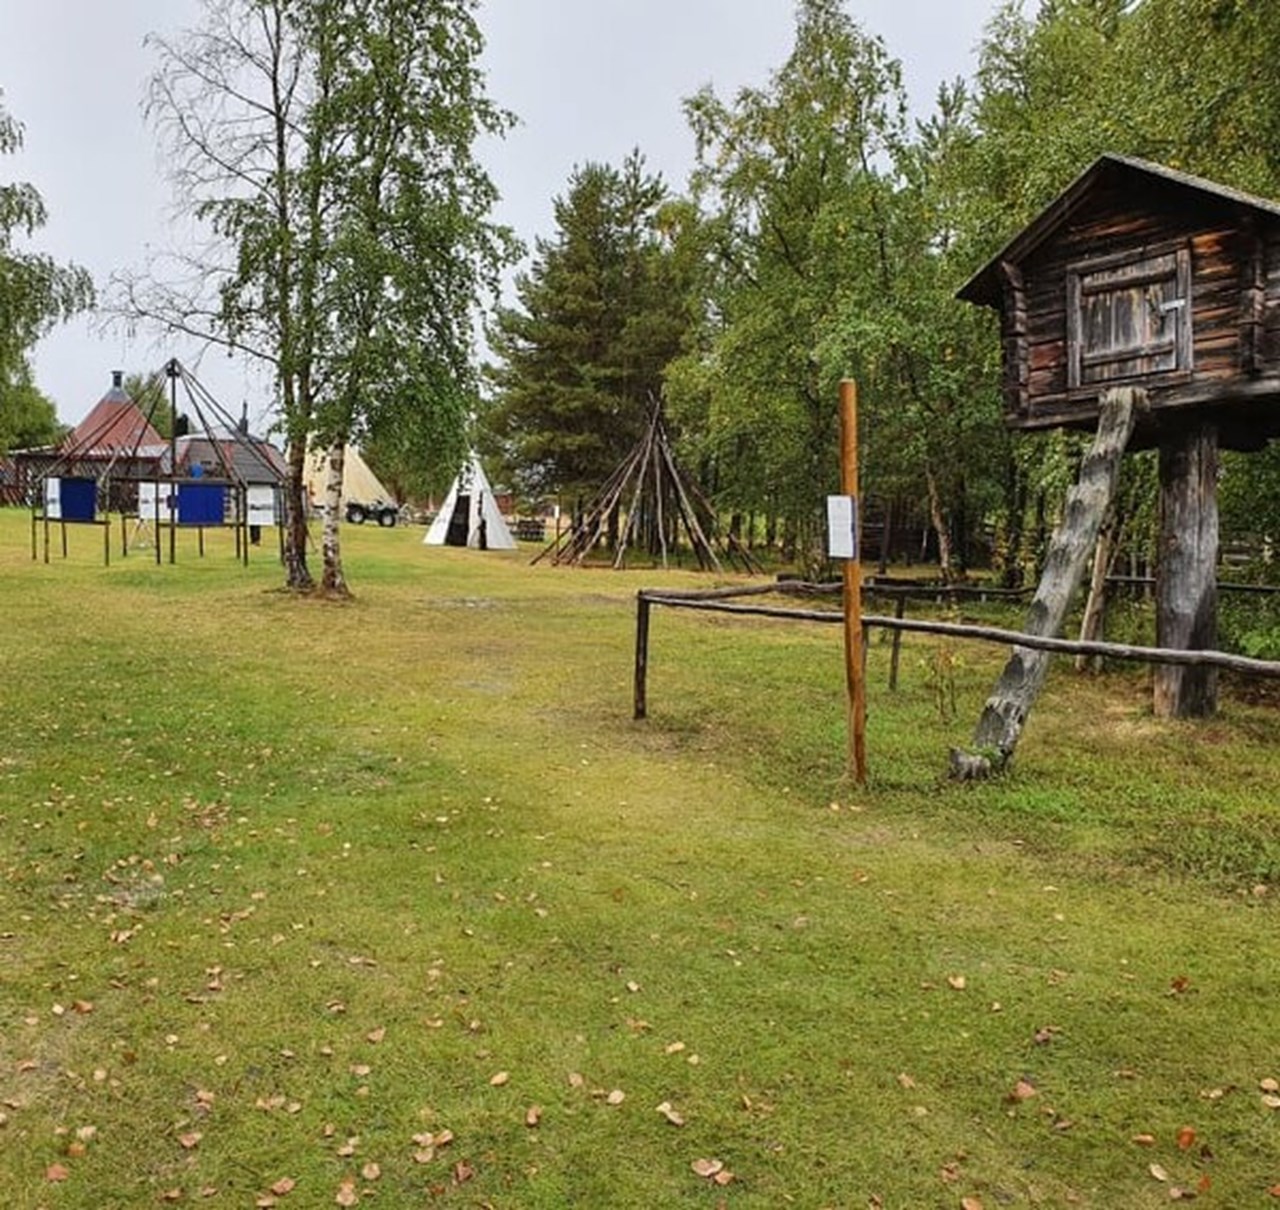 Out on the grass by buildings at the Sami open-air museum Nutti Sámi Siida